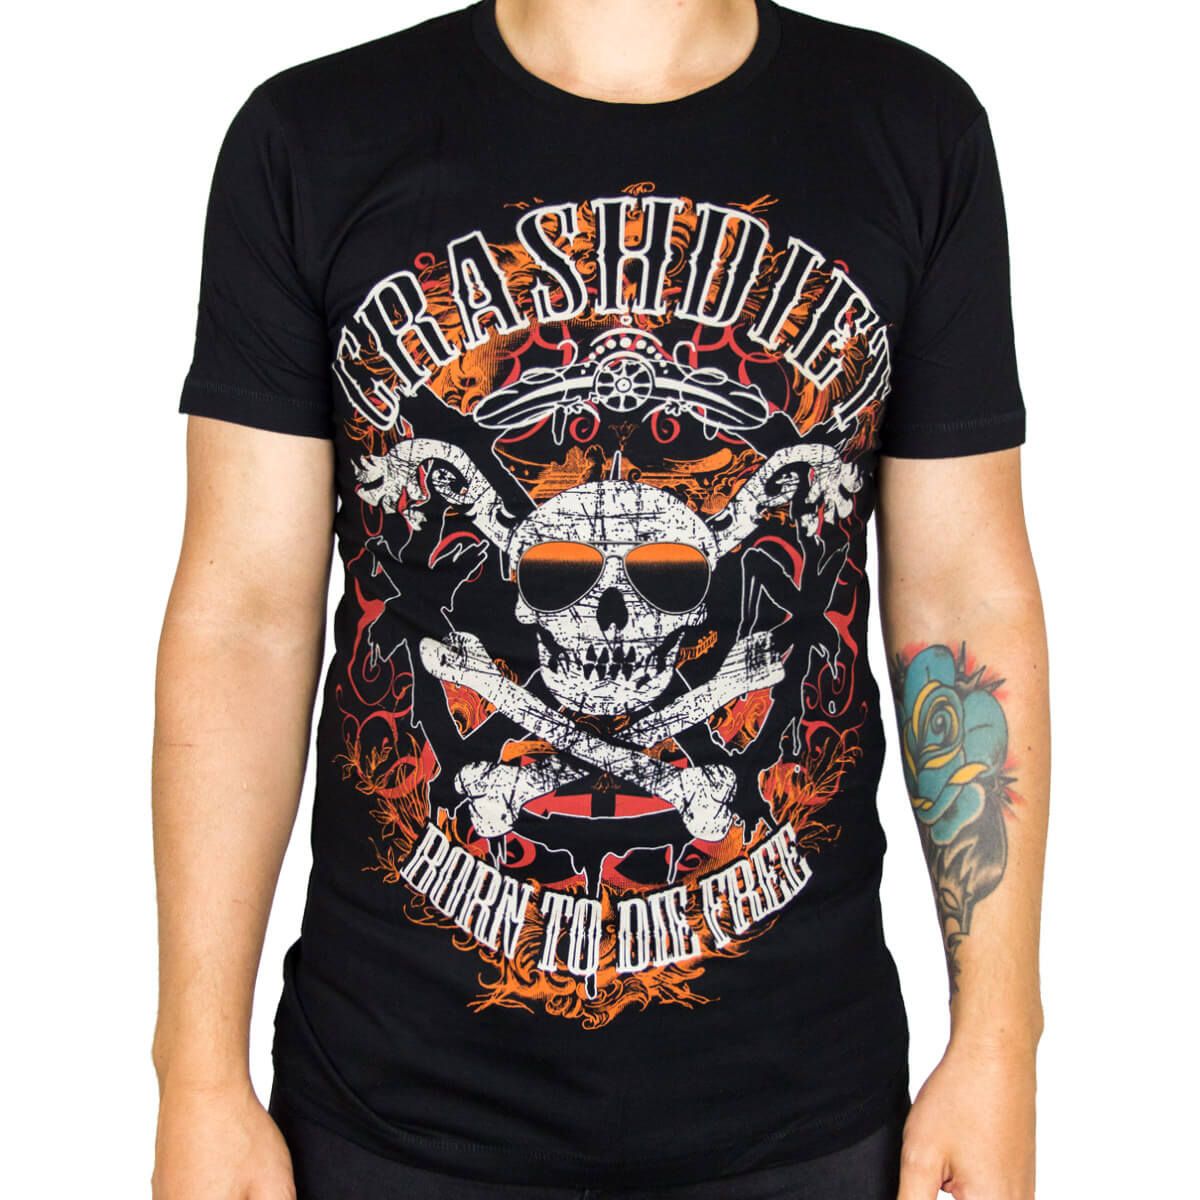 50% off: Rusty Born To Die Free T-Shirt